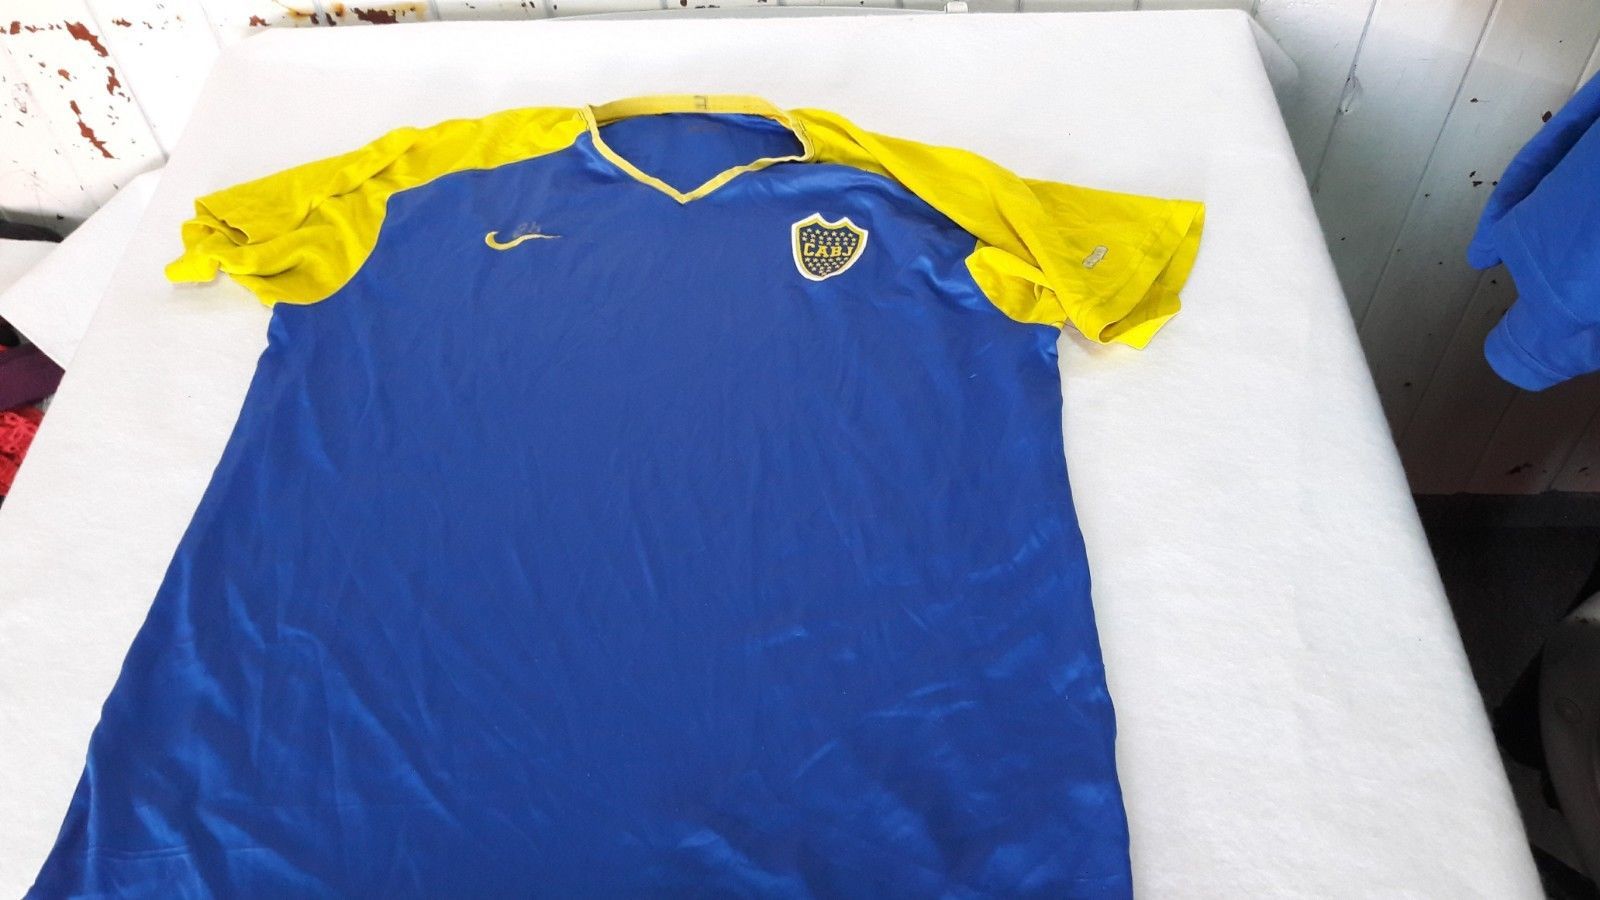 Old Boca Jr training football jersey original nike of the club, with number 26 - $98.01